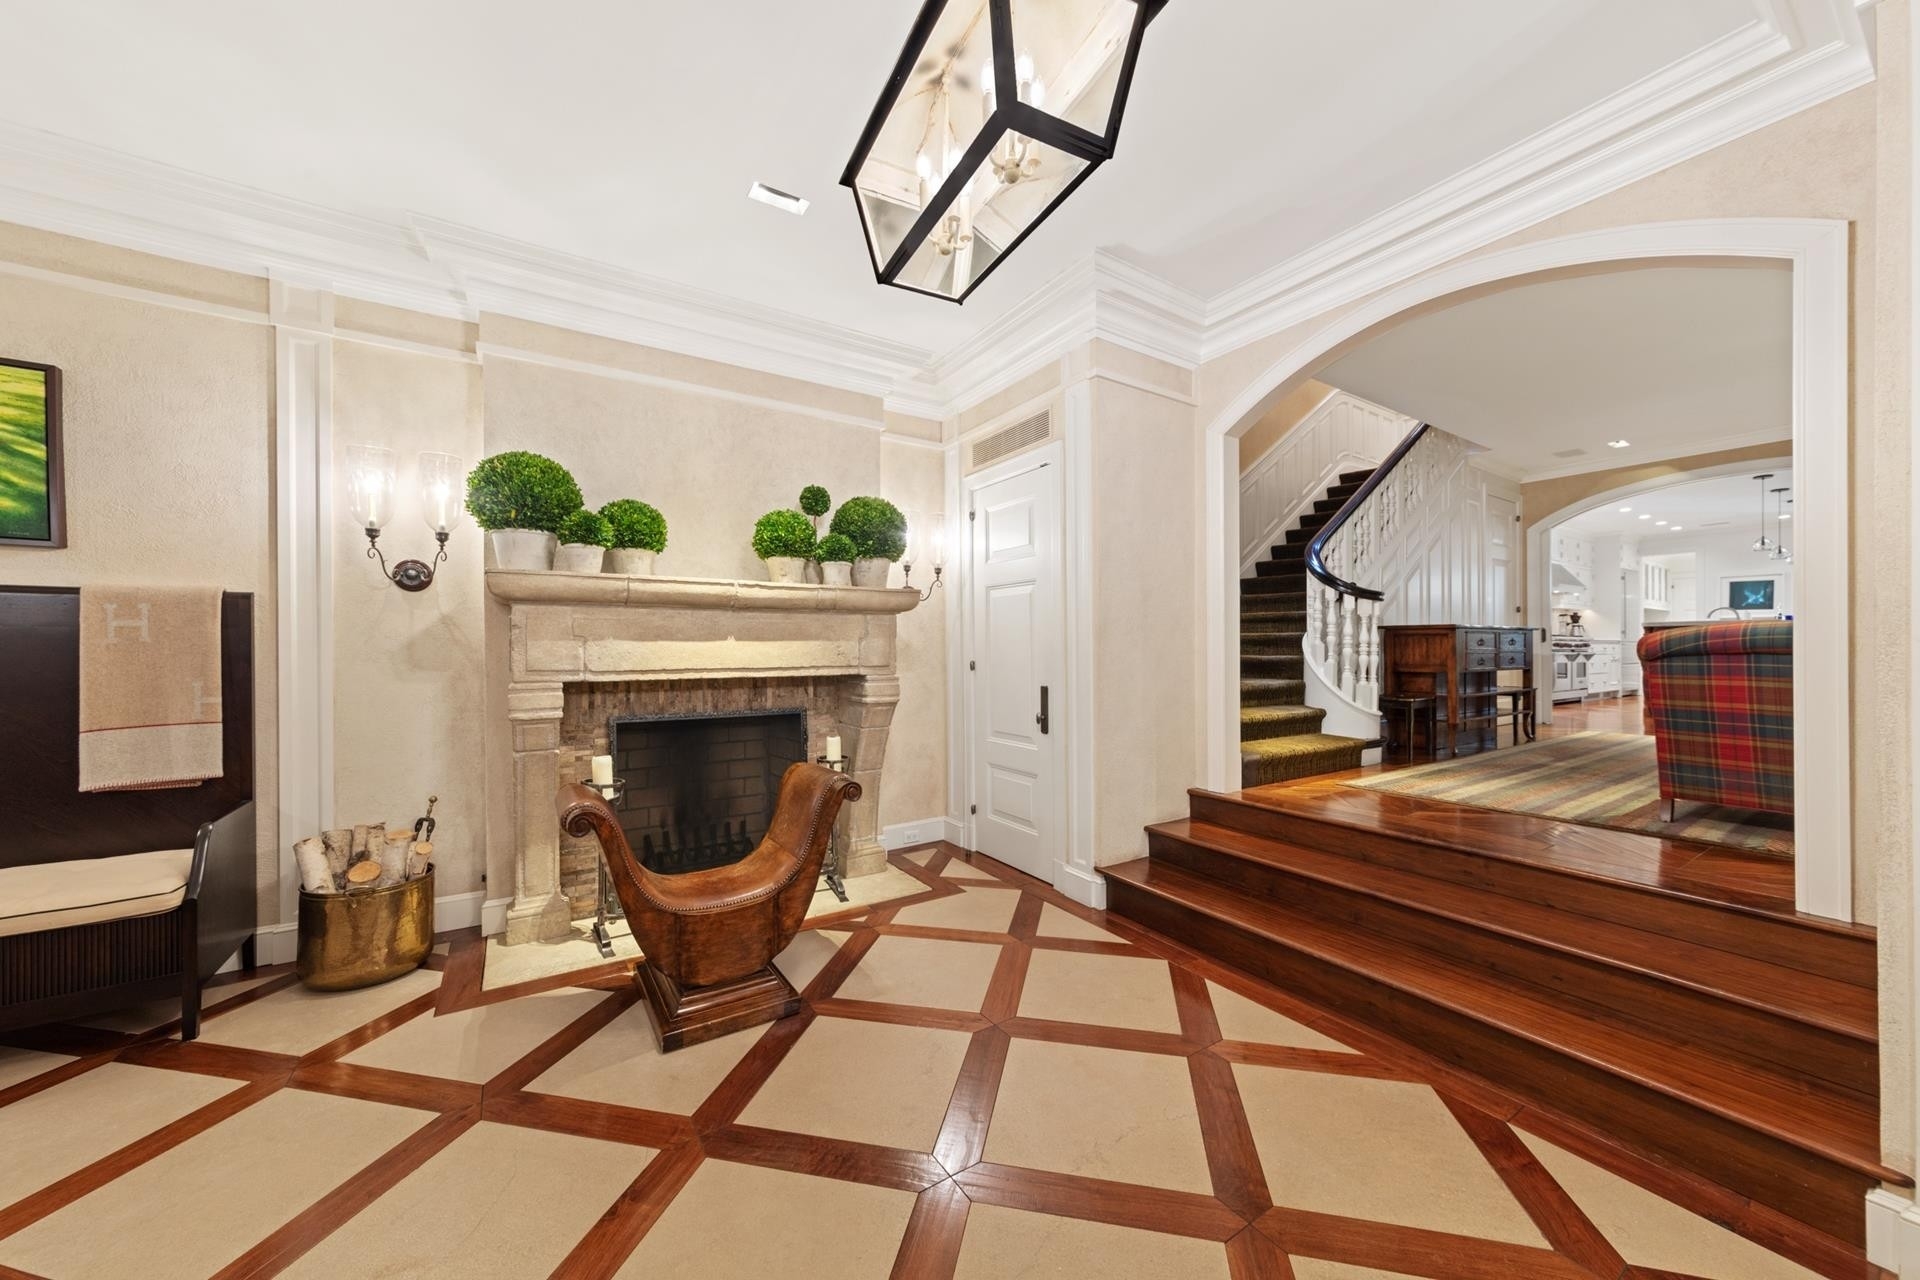 Property at 20 E 94TH ST , TOWNHOUSE Carnegie Hill, New York, New York 10128